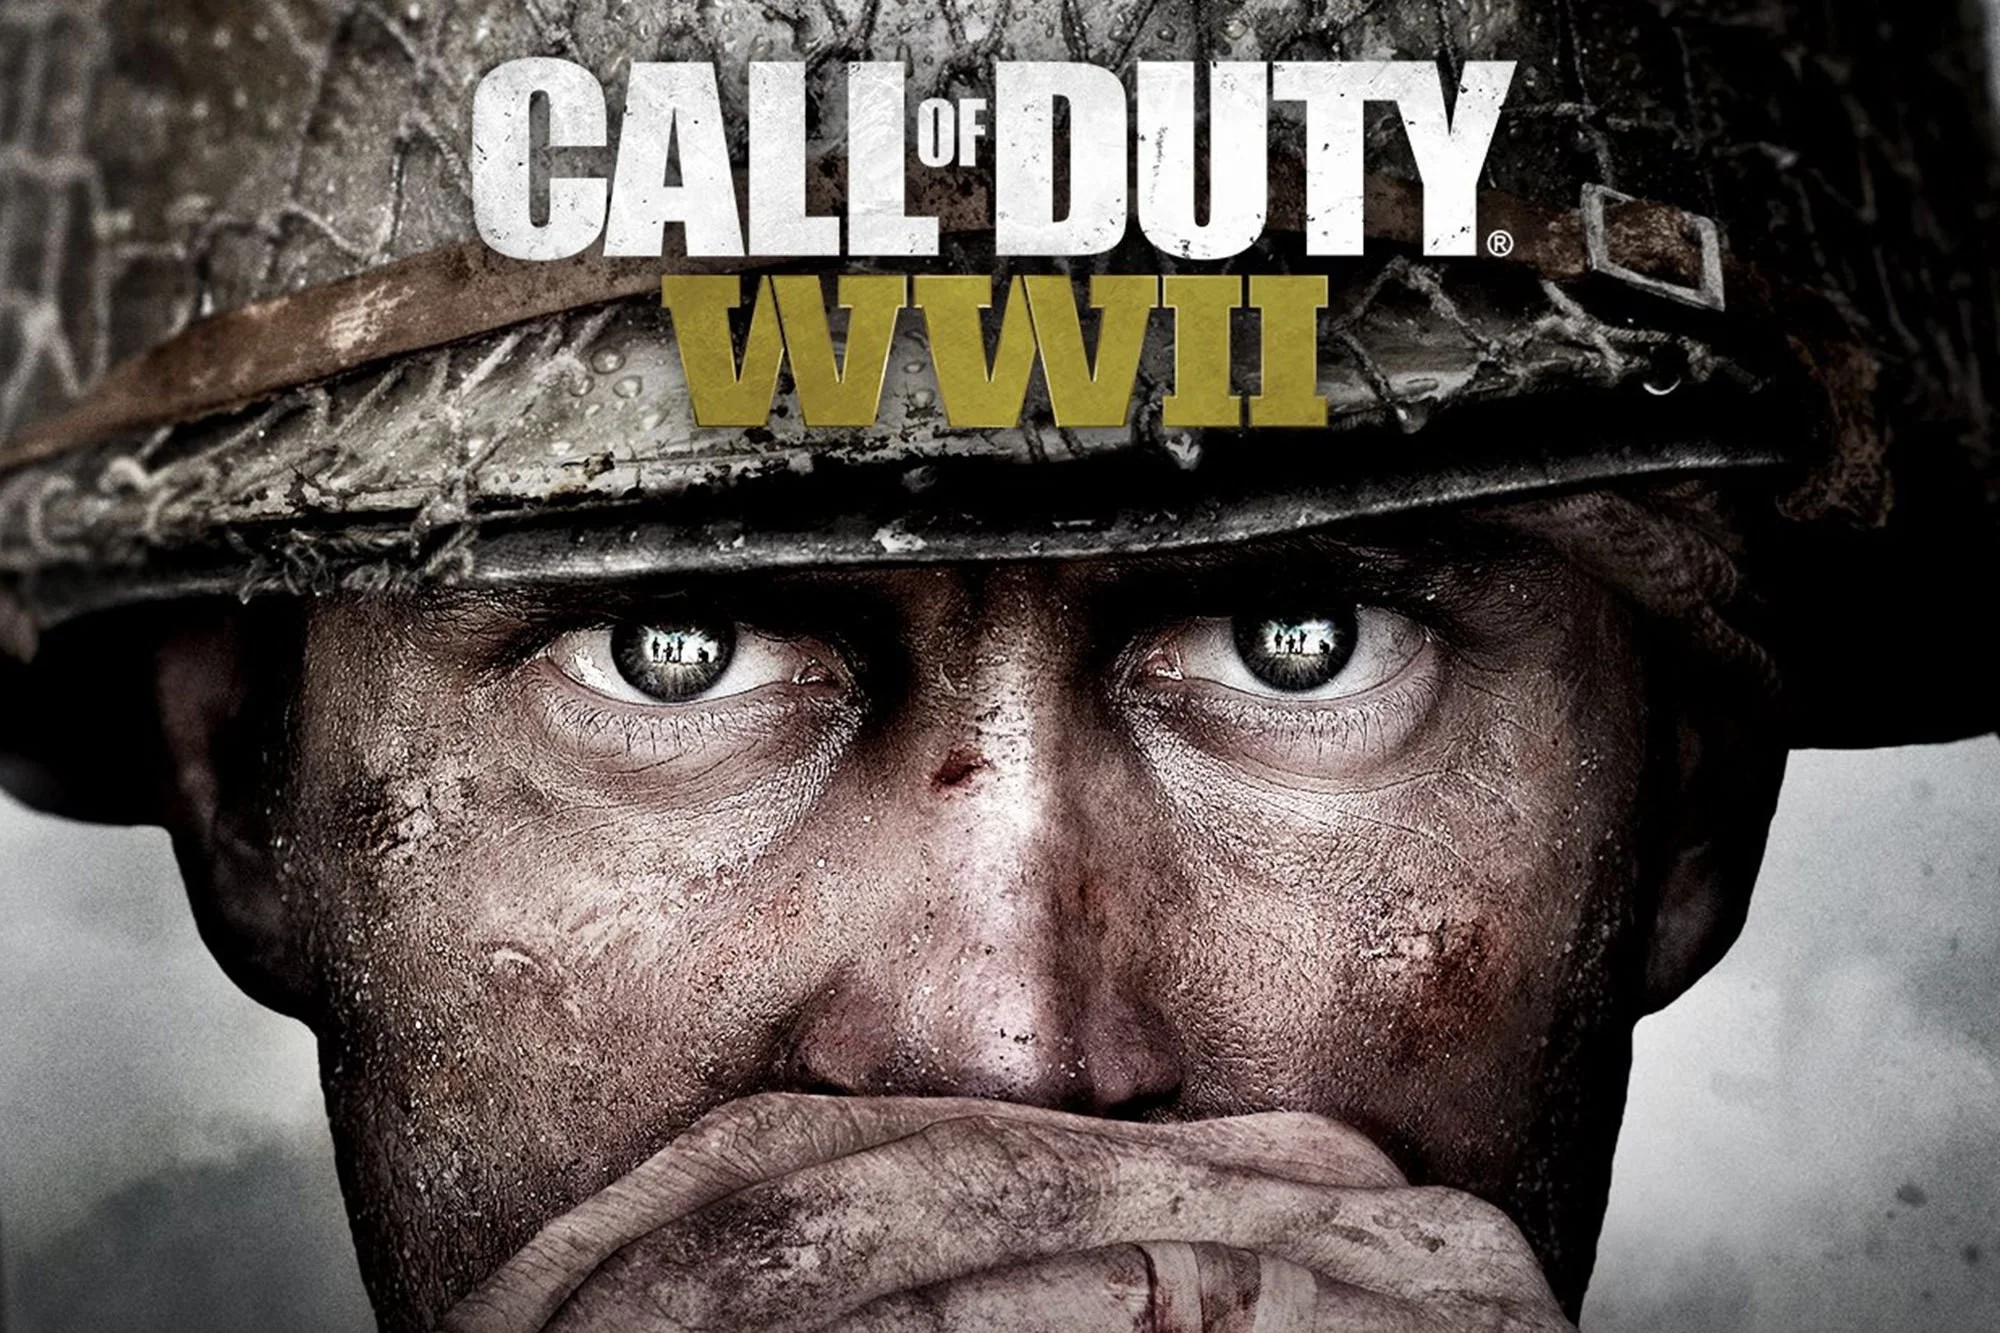 Call Of Duty WWII Wallpaper